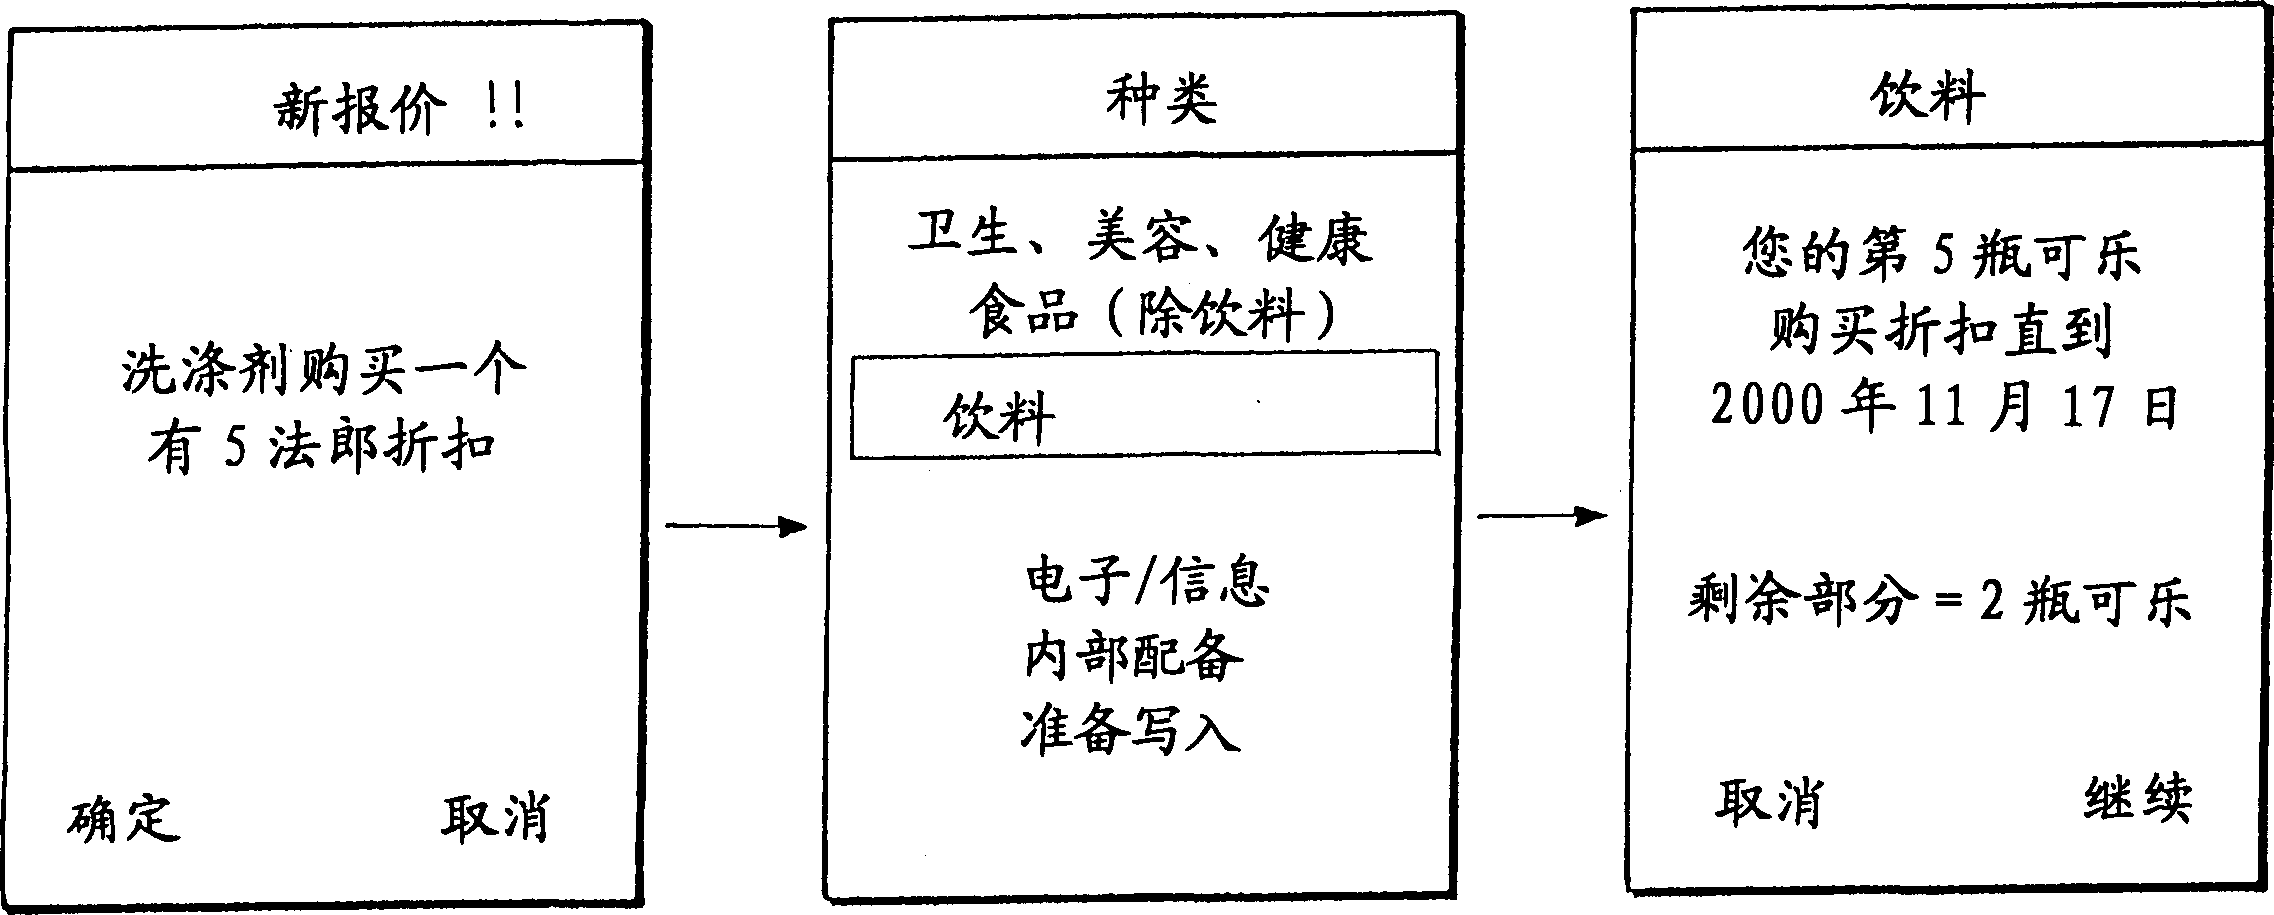 Method and system for receiving, stroing and processing electronic vouchers using mobile telephone or personal digital assistant